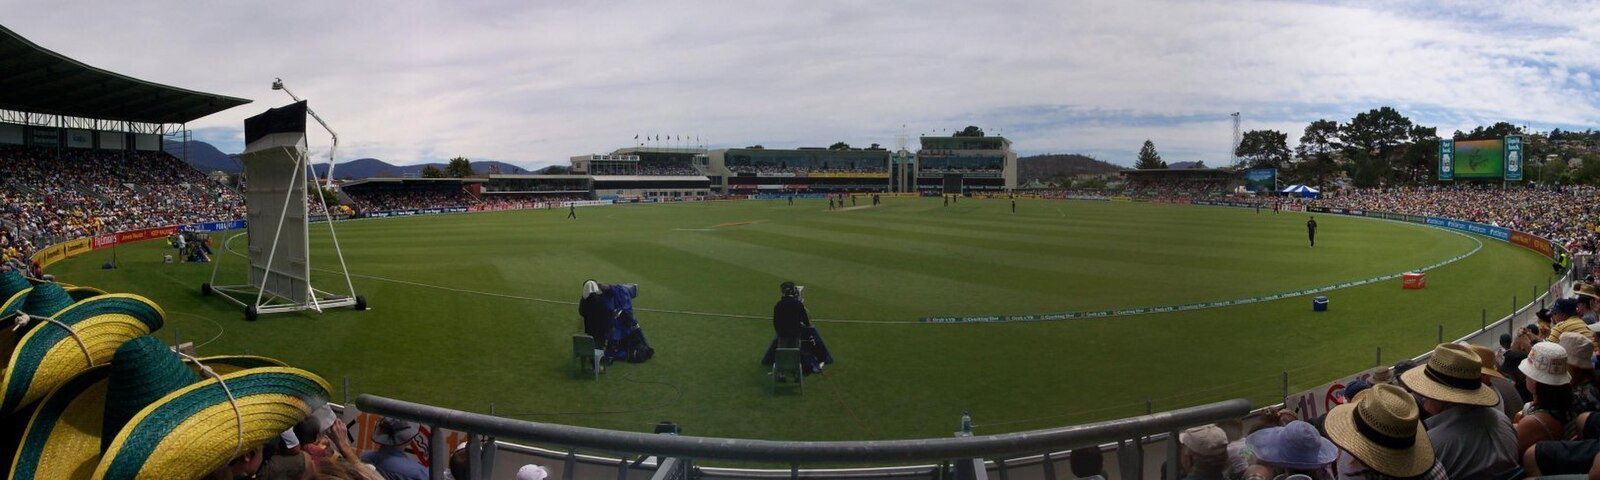 Australia vs New Zealand playing a one-day game at Bellerive Oval in Hobart, one of Australia's smaller international cricket grounds.